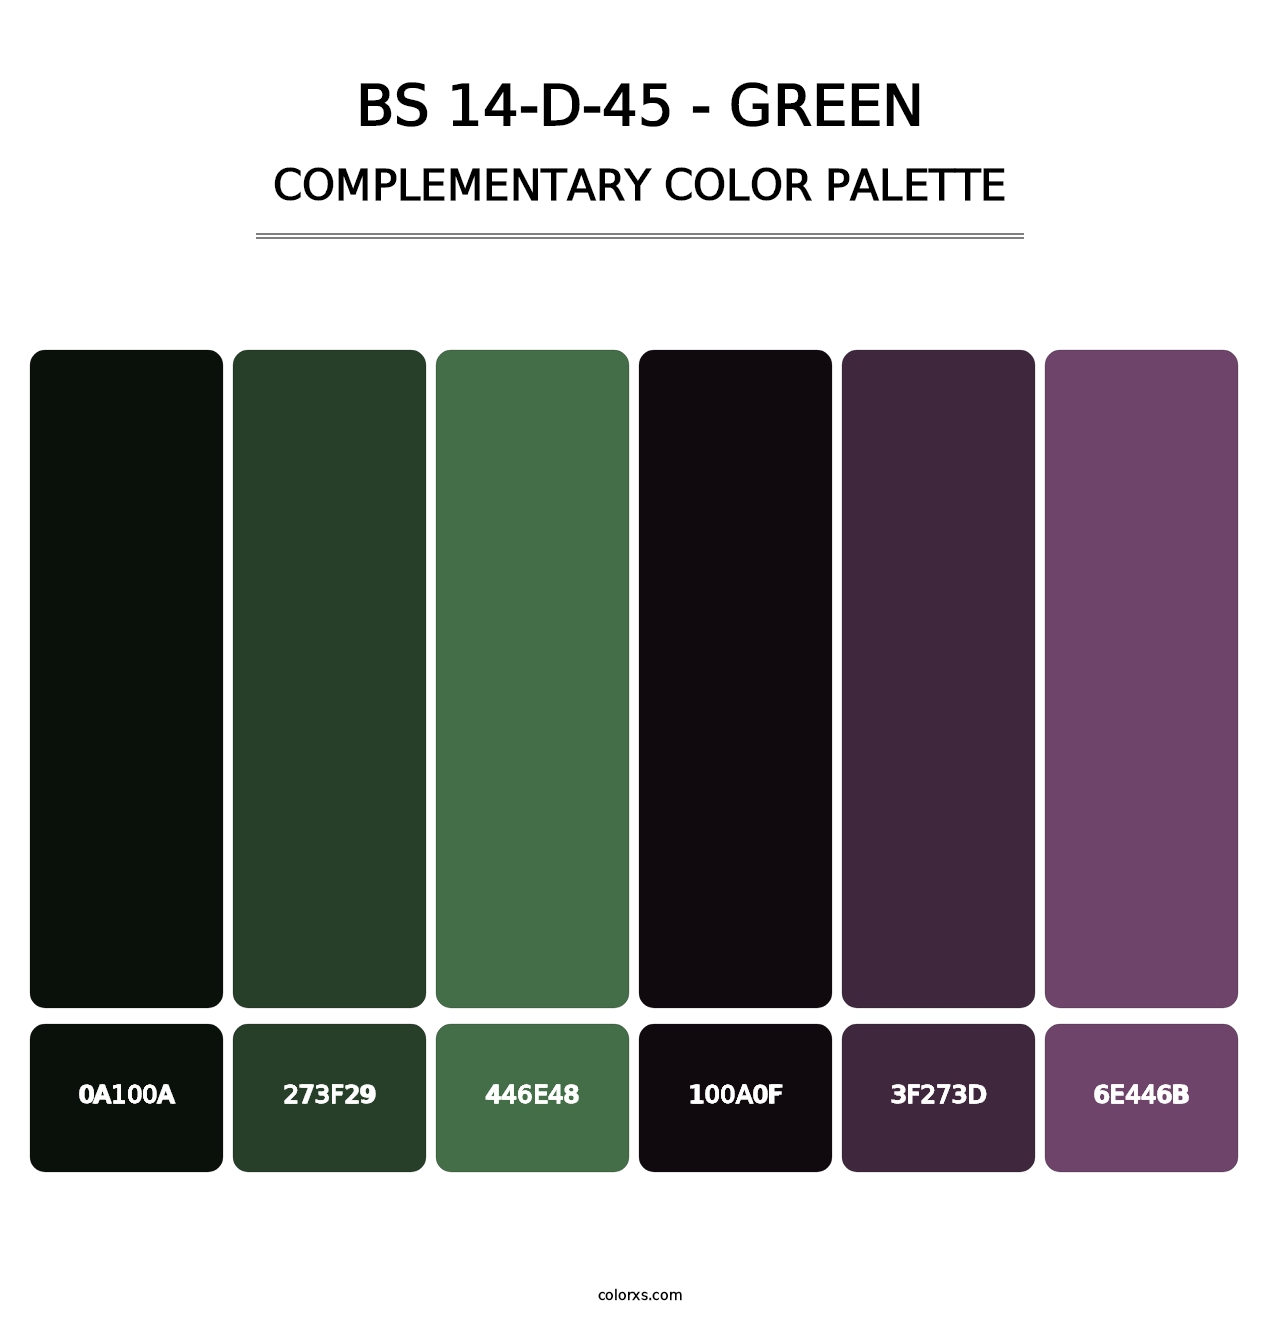 BS 14-D-45 - Green - Complementary Color Palette